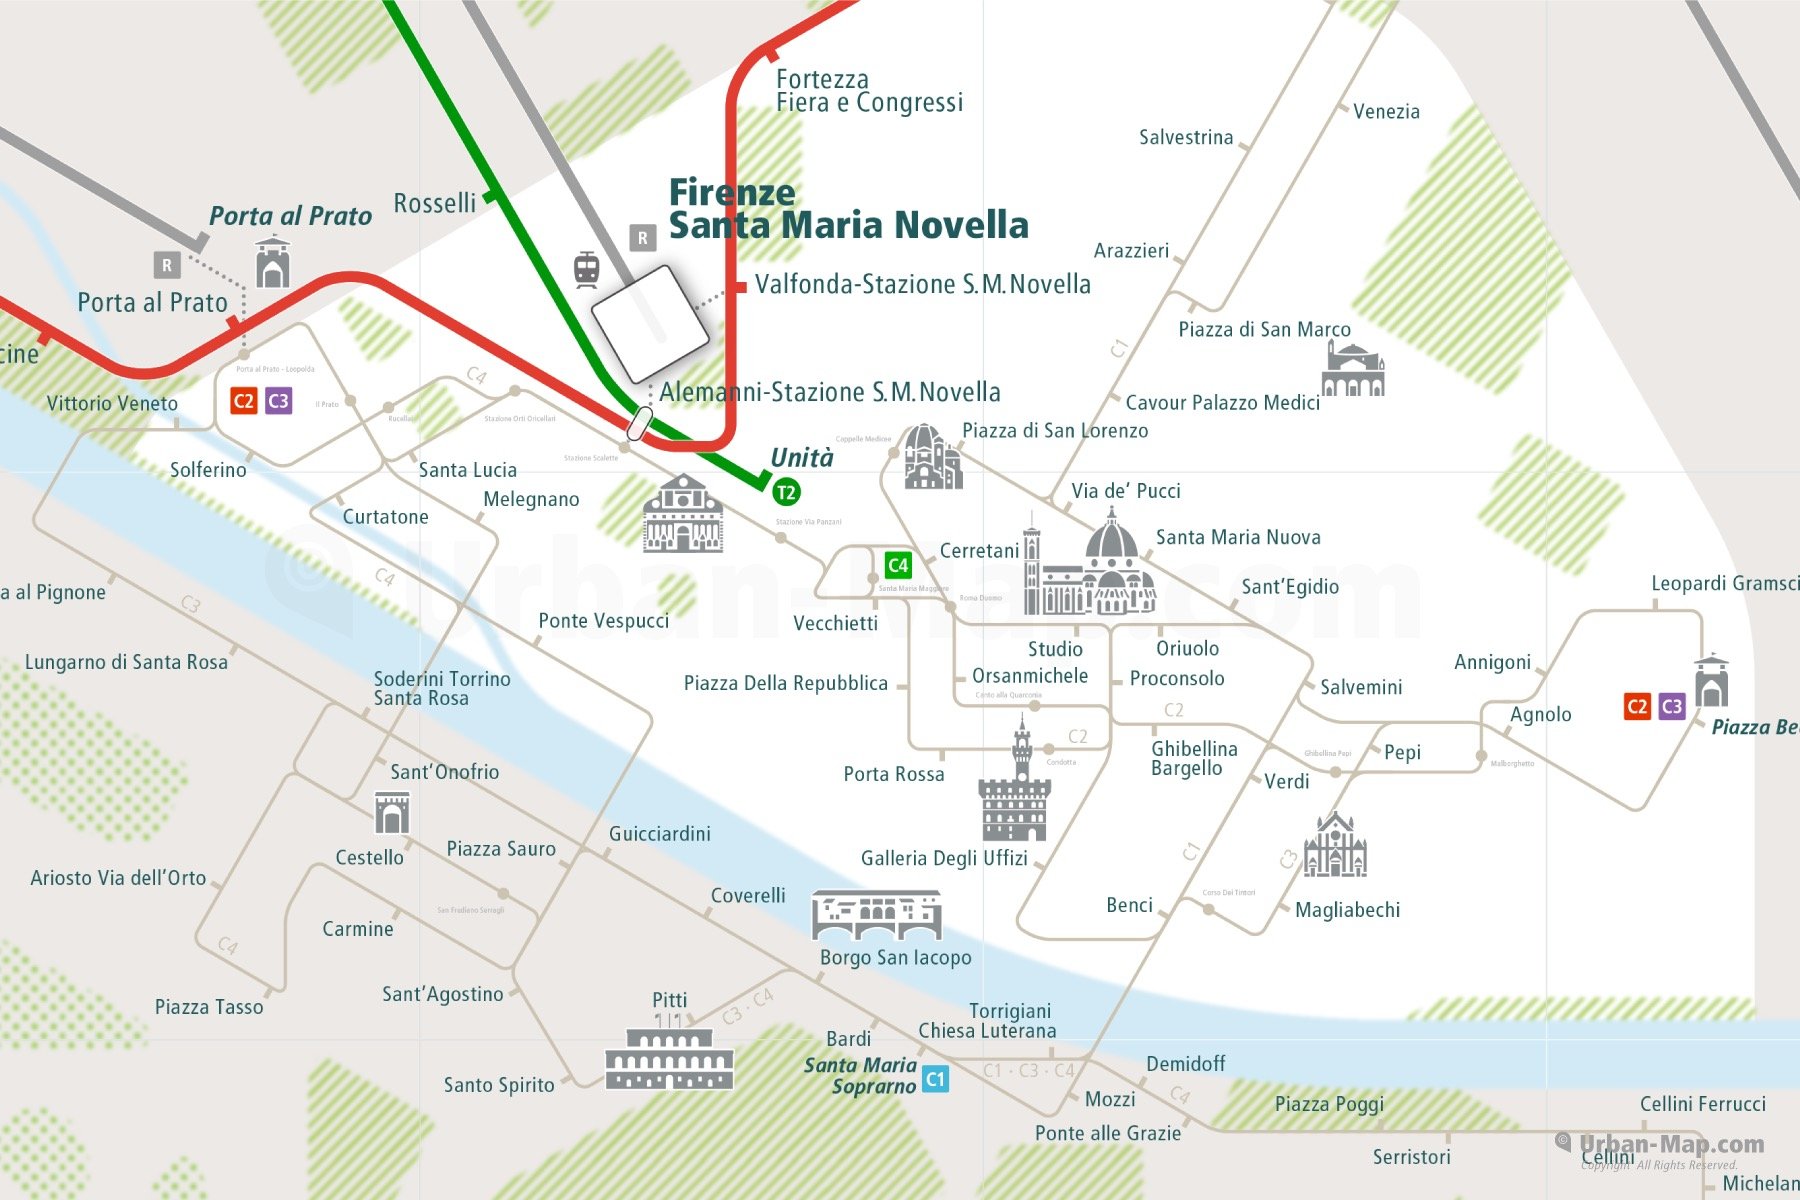 Florence City Rail Map shows the train and public transportation routes of the metro, tram, ferry, funicular - Close-up